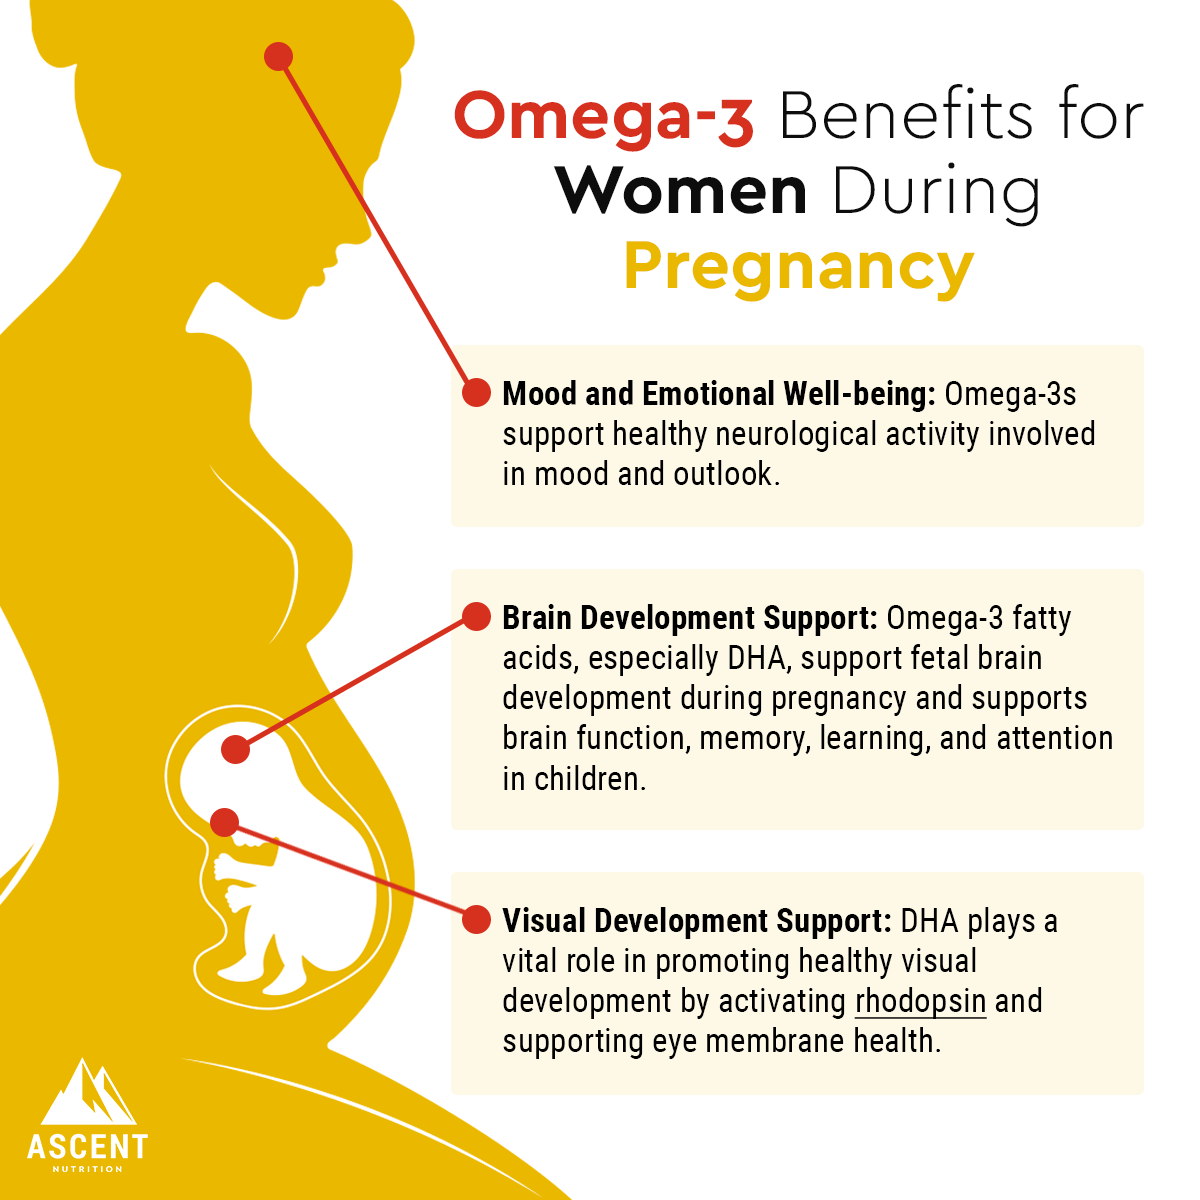 Omega-3 Benefits for Women During Pregnancy